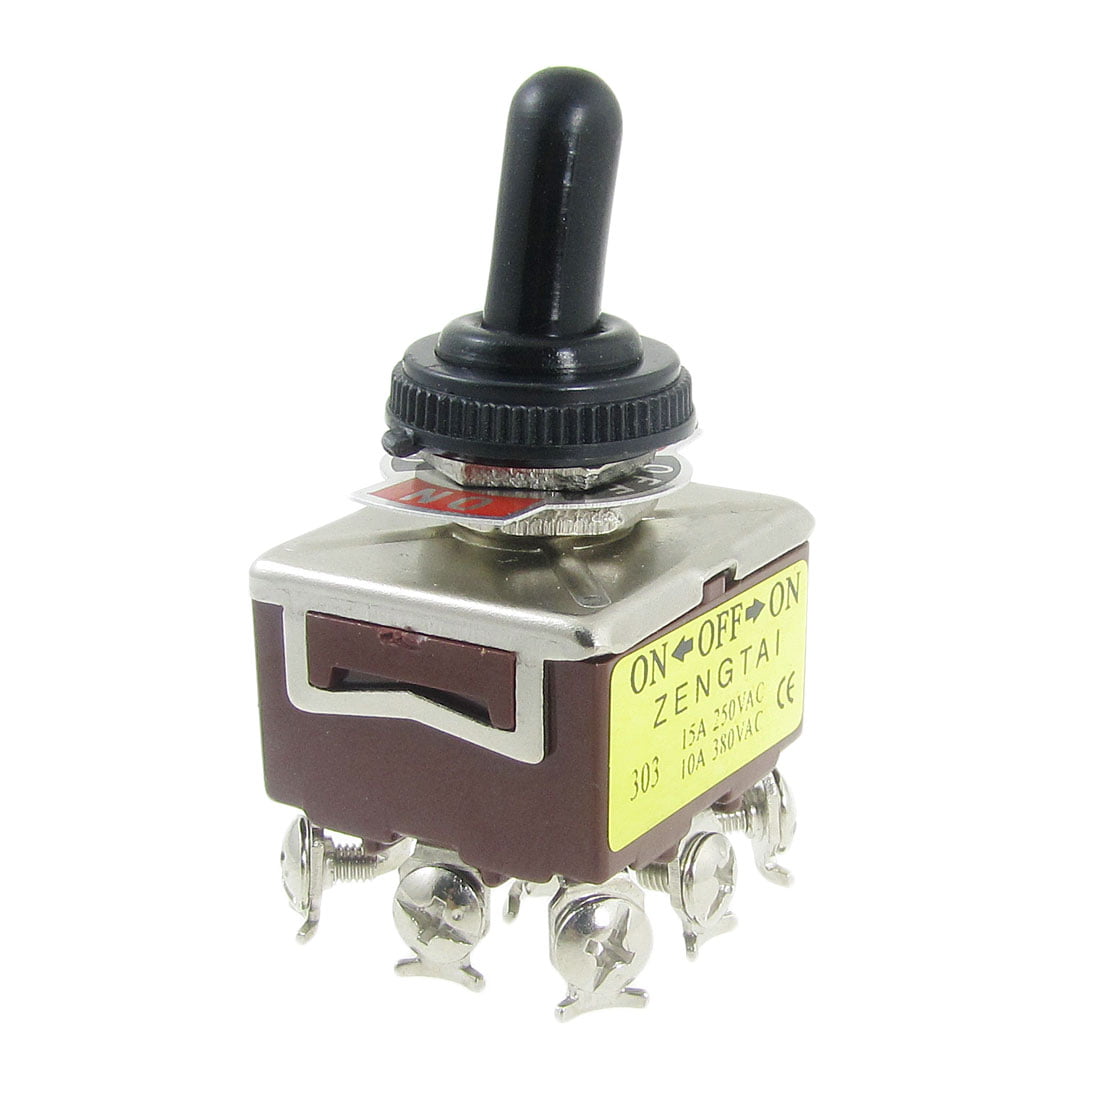 AC 250V 15A Amps ON/OFF 2 Position SPST Toggle Switch With Waterproof Boot LW 